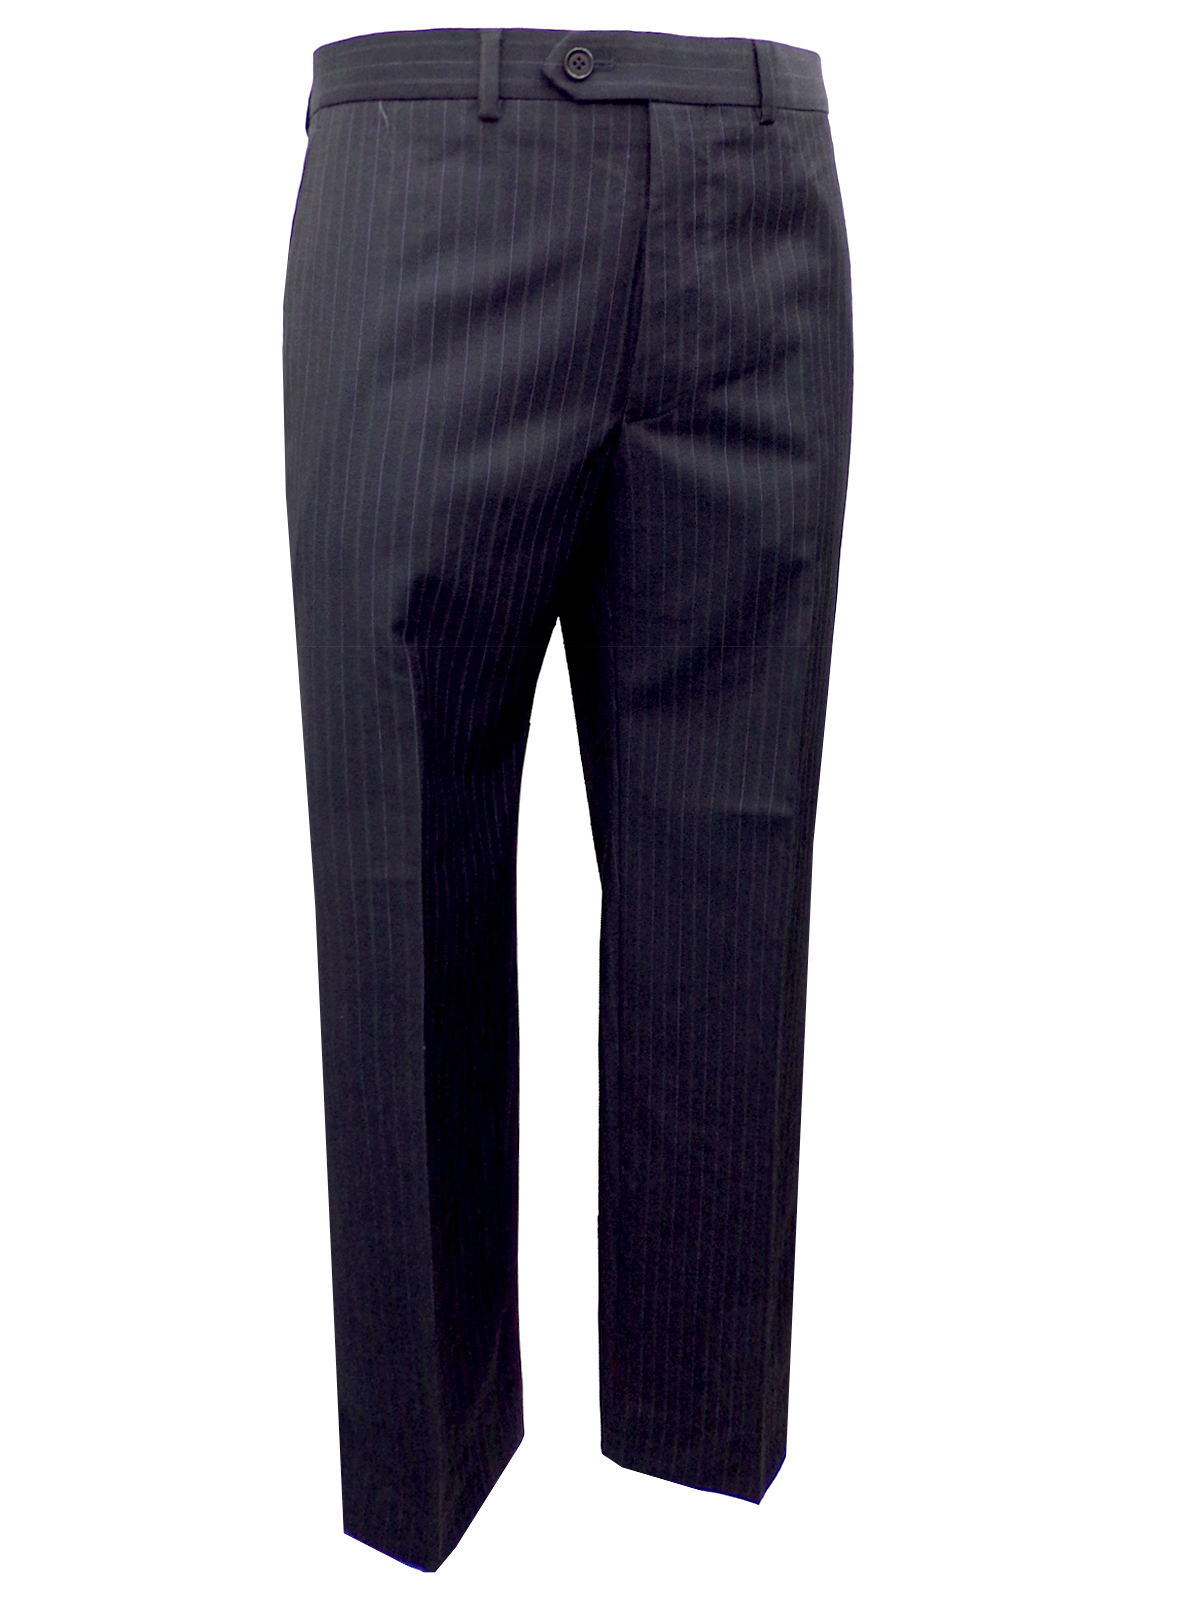 Marks and Spencer - - M&5 GREY Wool Blend Flat Front Pinstripe Trousers ...